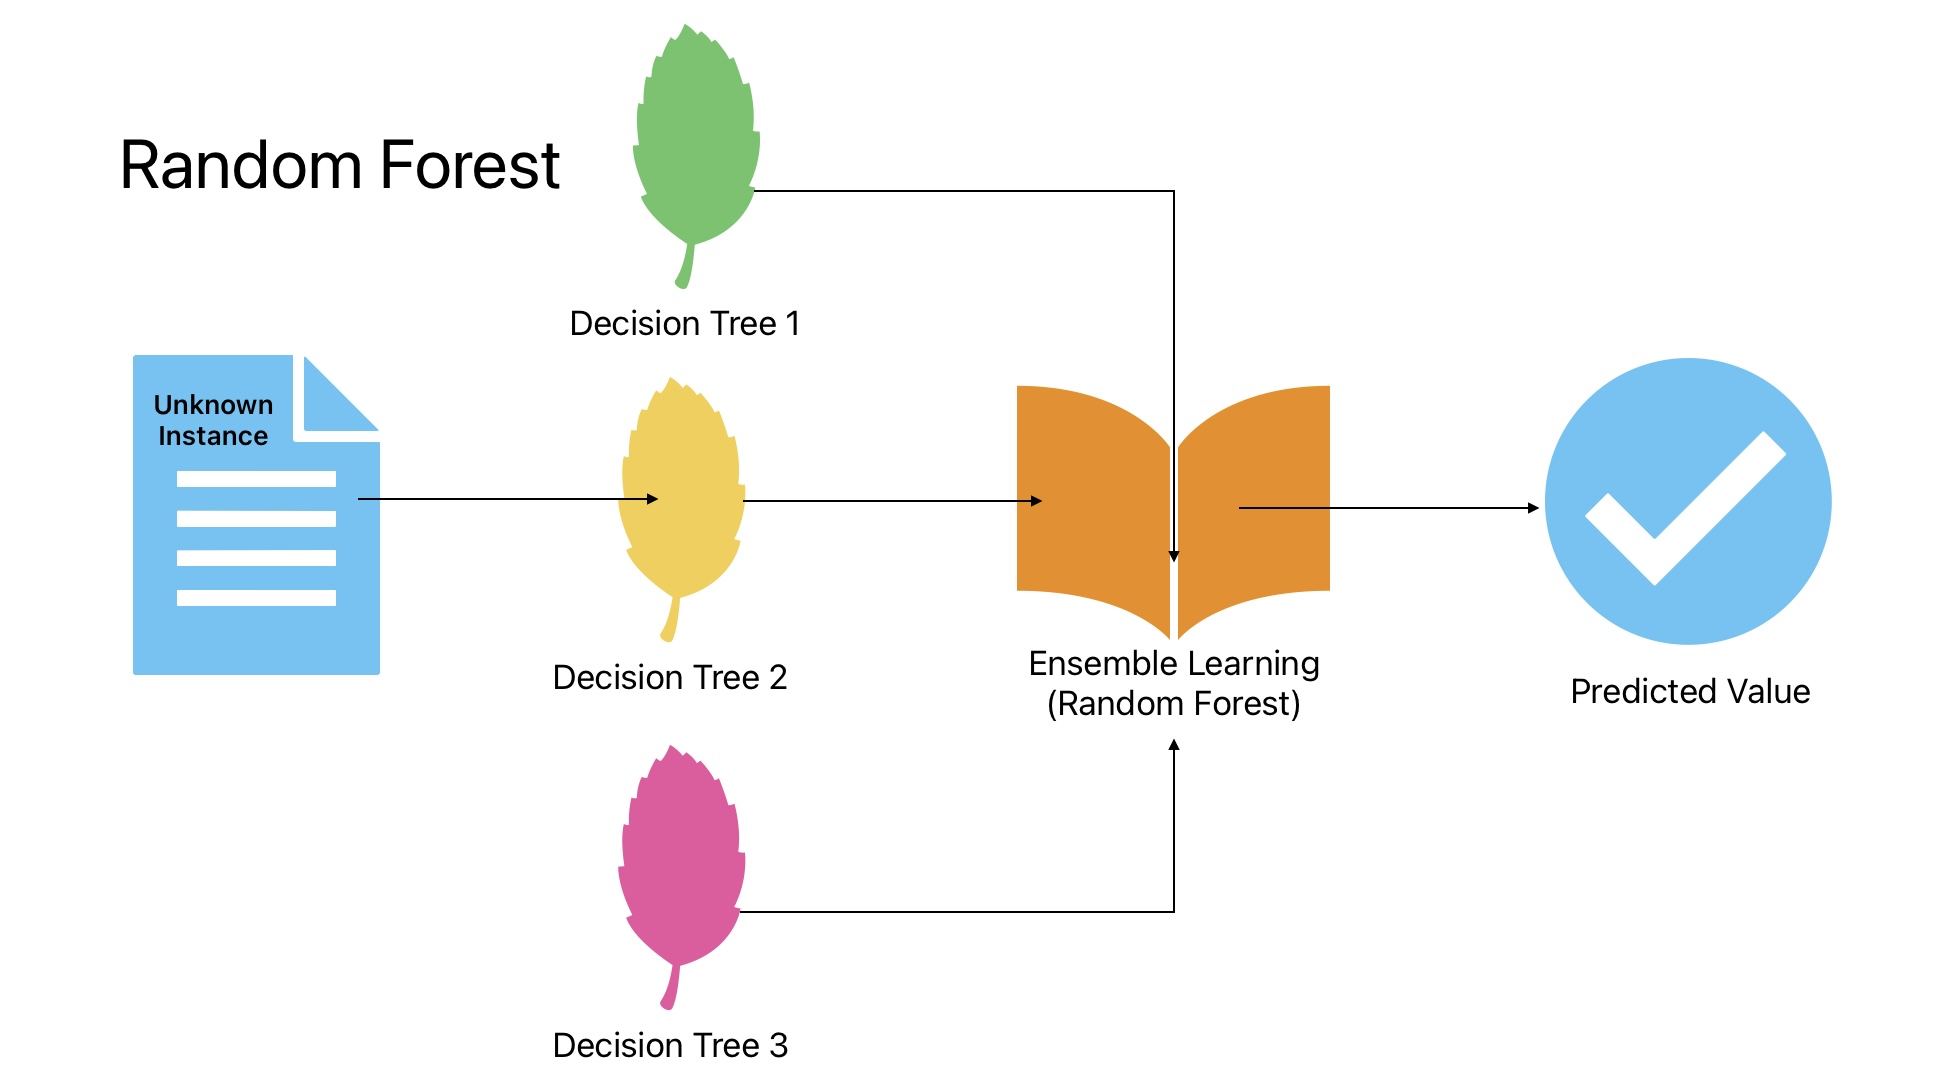 This image shows the working of Random Forest algorithms